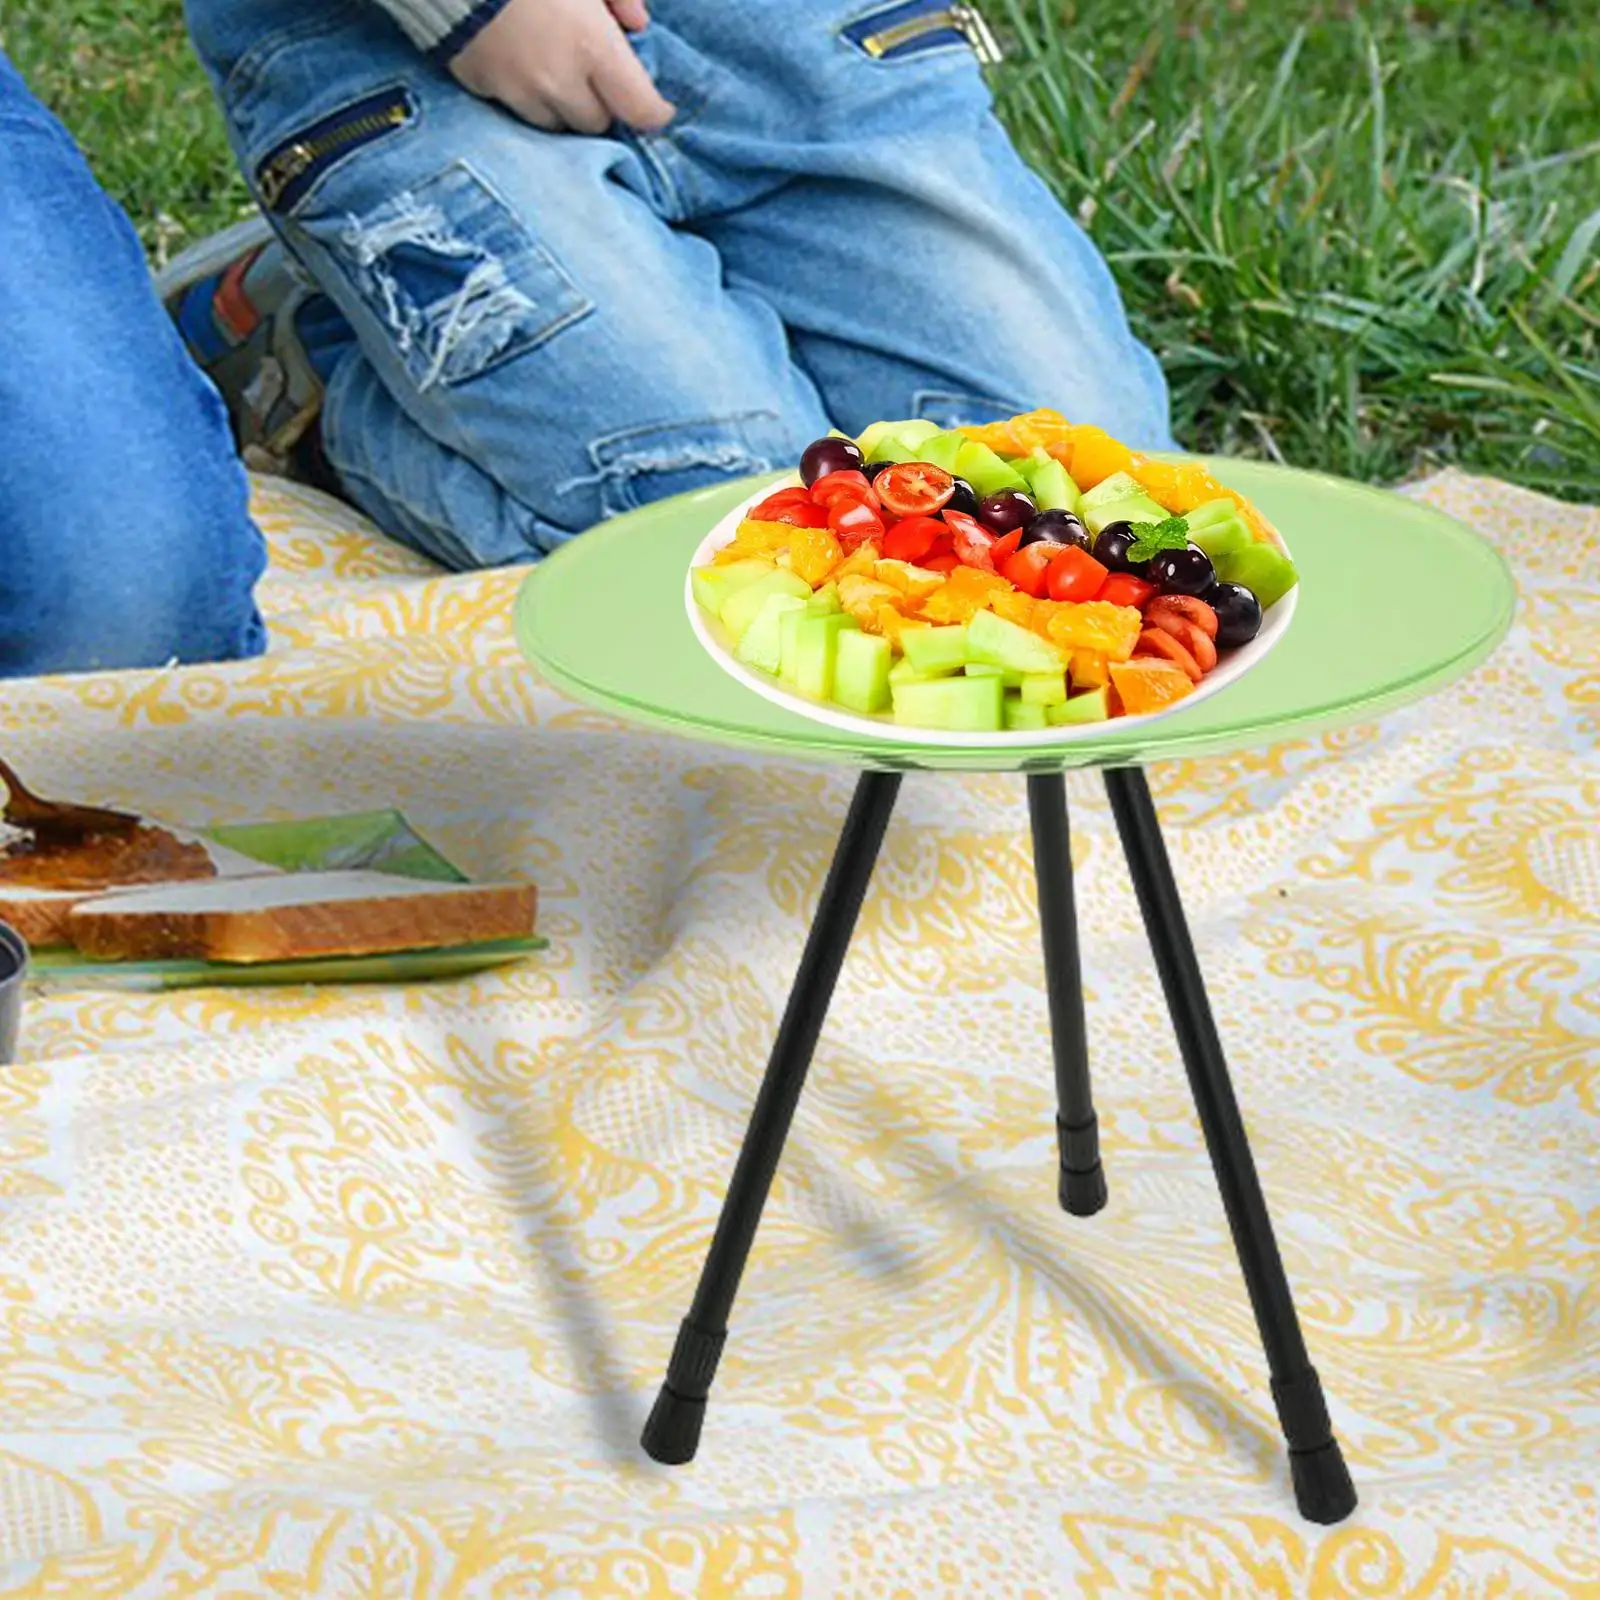 Portable Triangular Round Table Foldable Stable Multifunction Three Legged Telescopic Lift Dining Desk for Garden Picnic Party